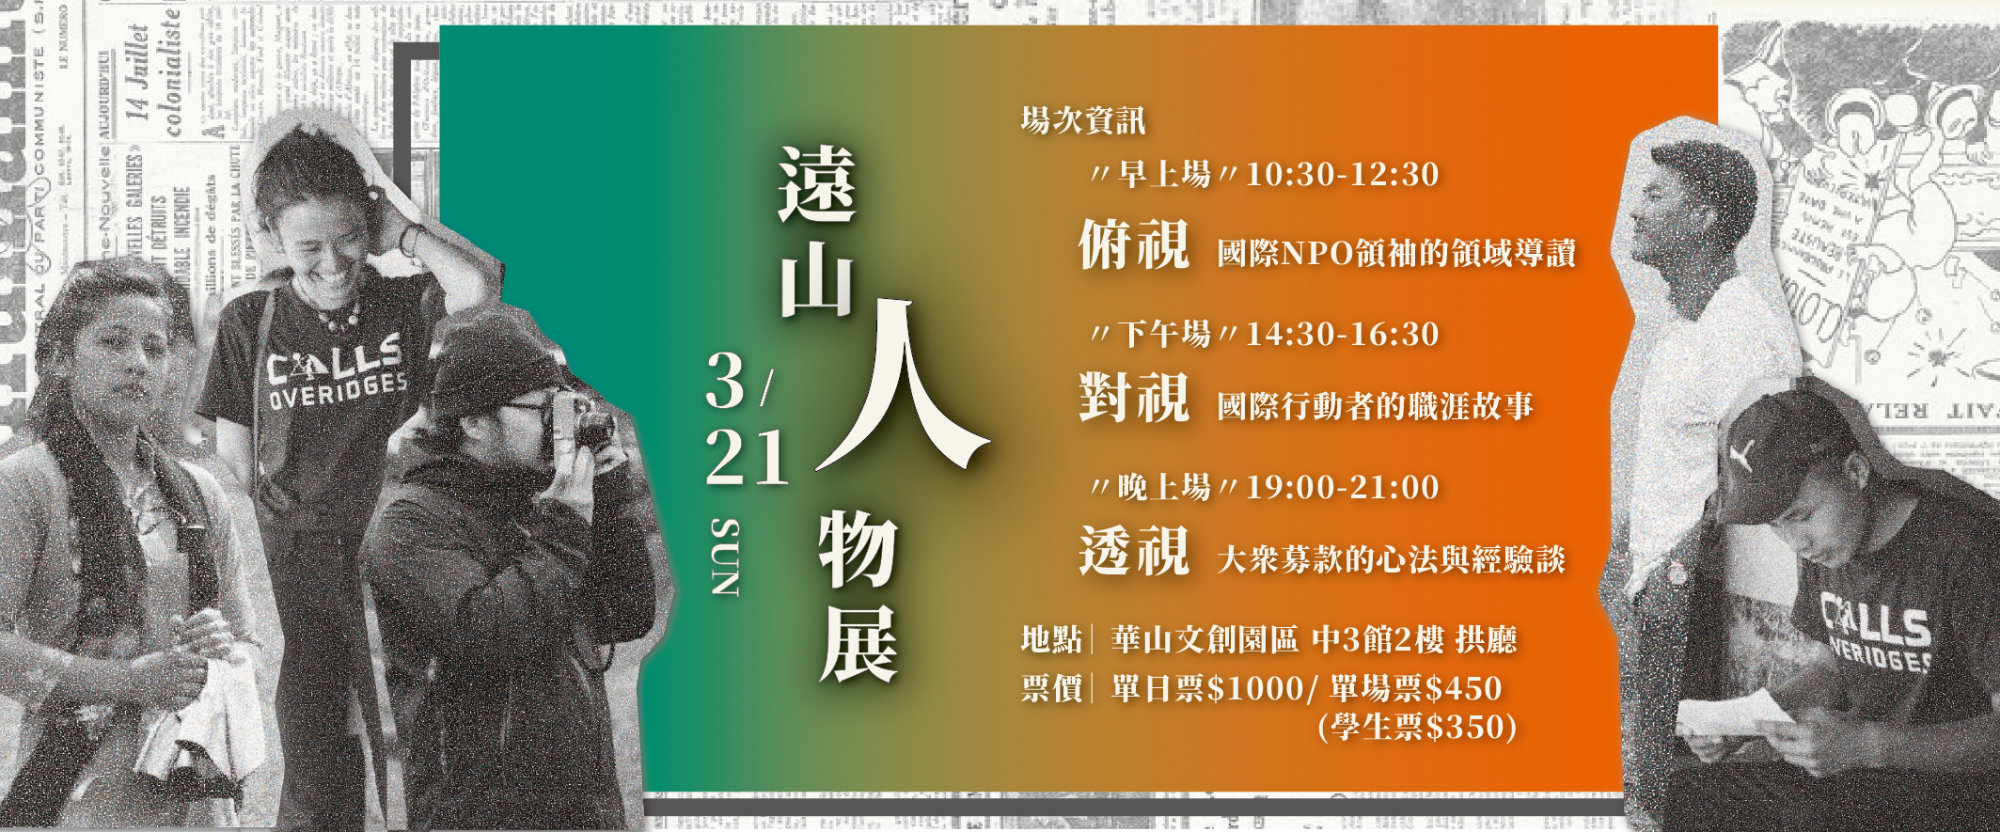 Neti活動頁banner.png